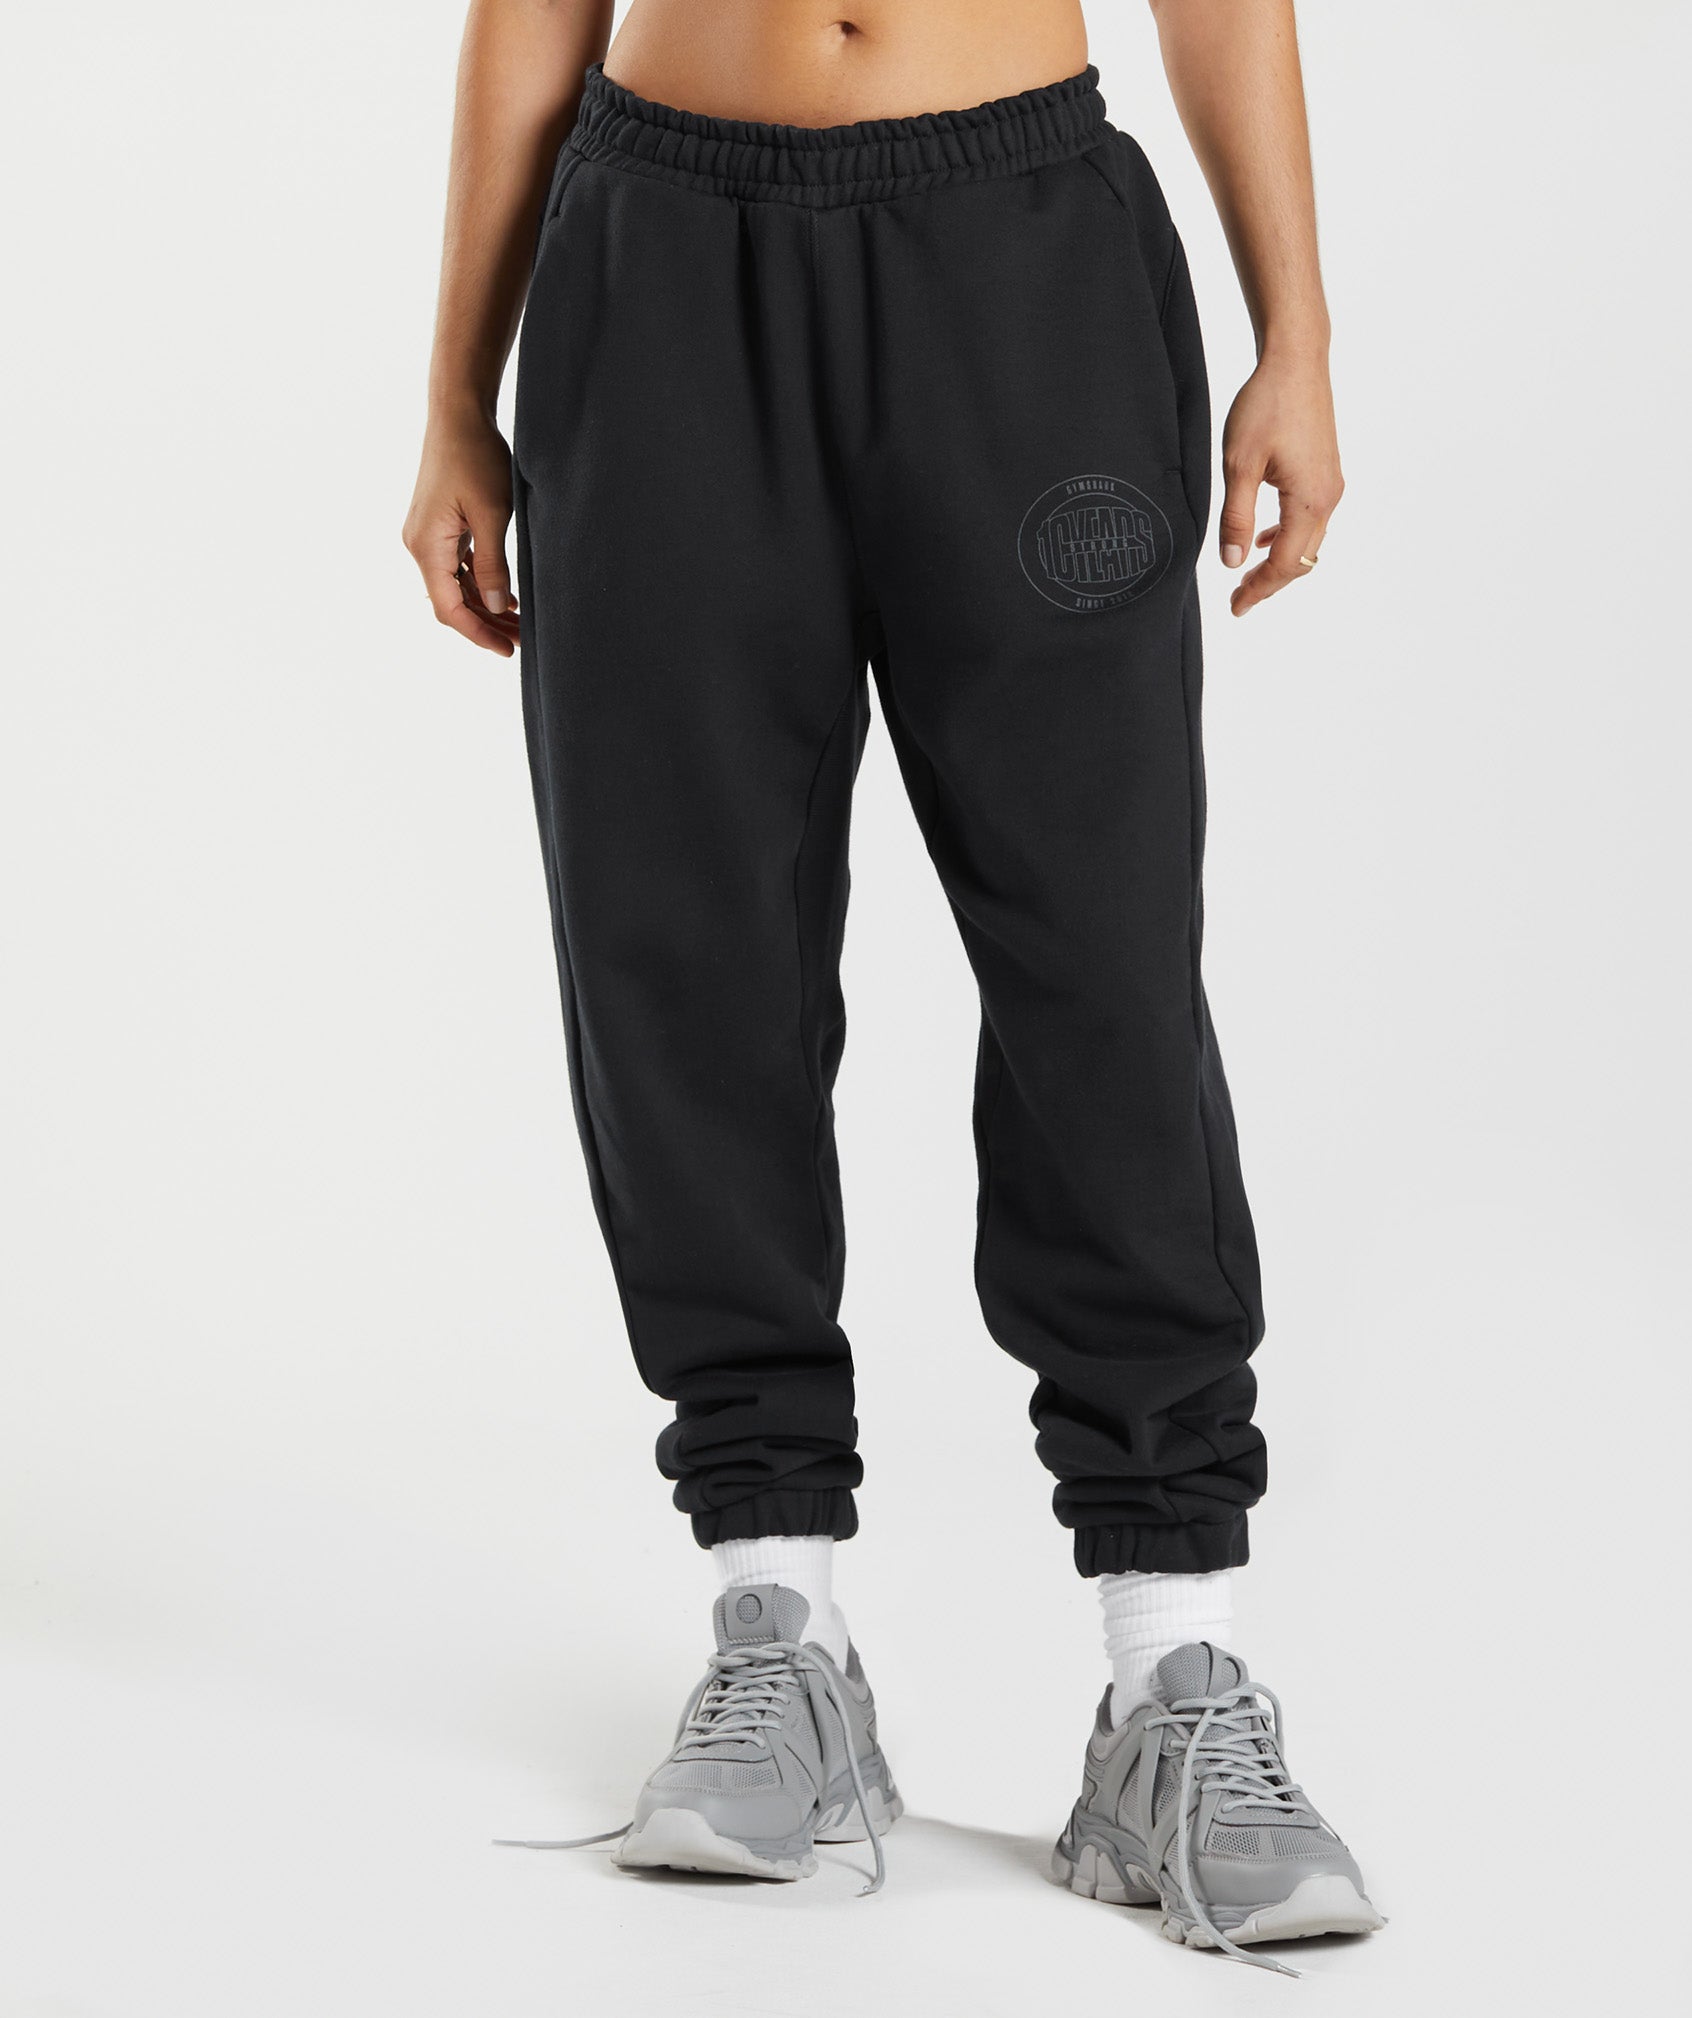 GS10 Year Joggers